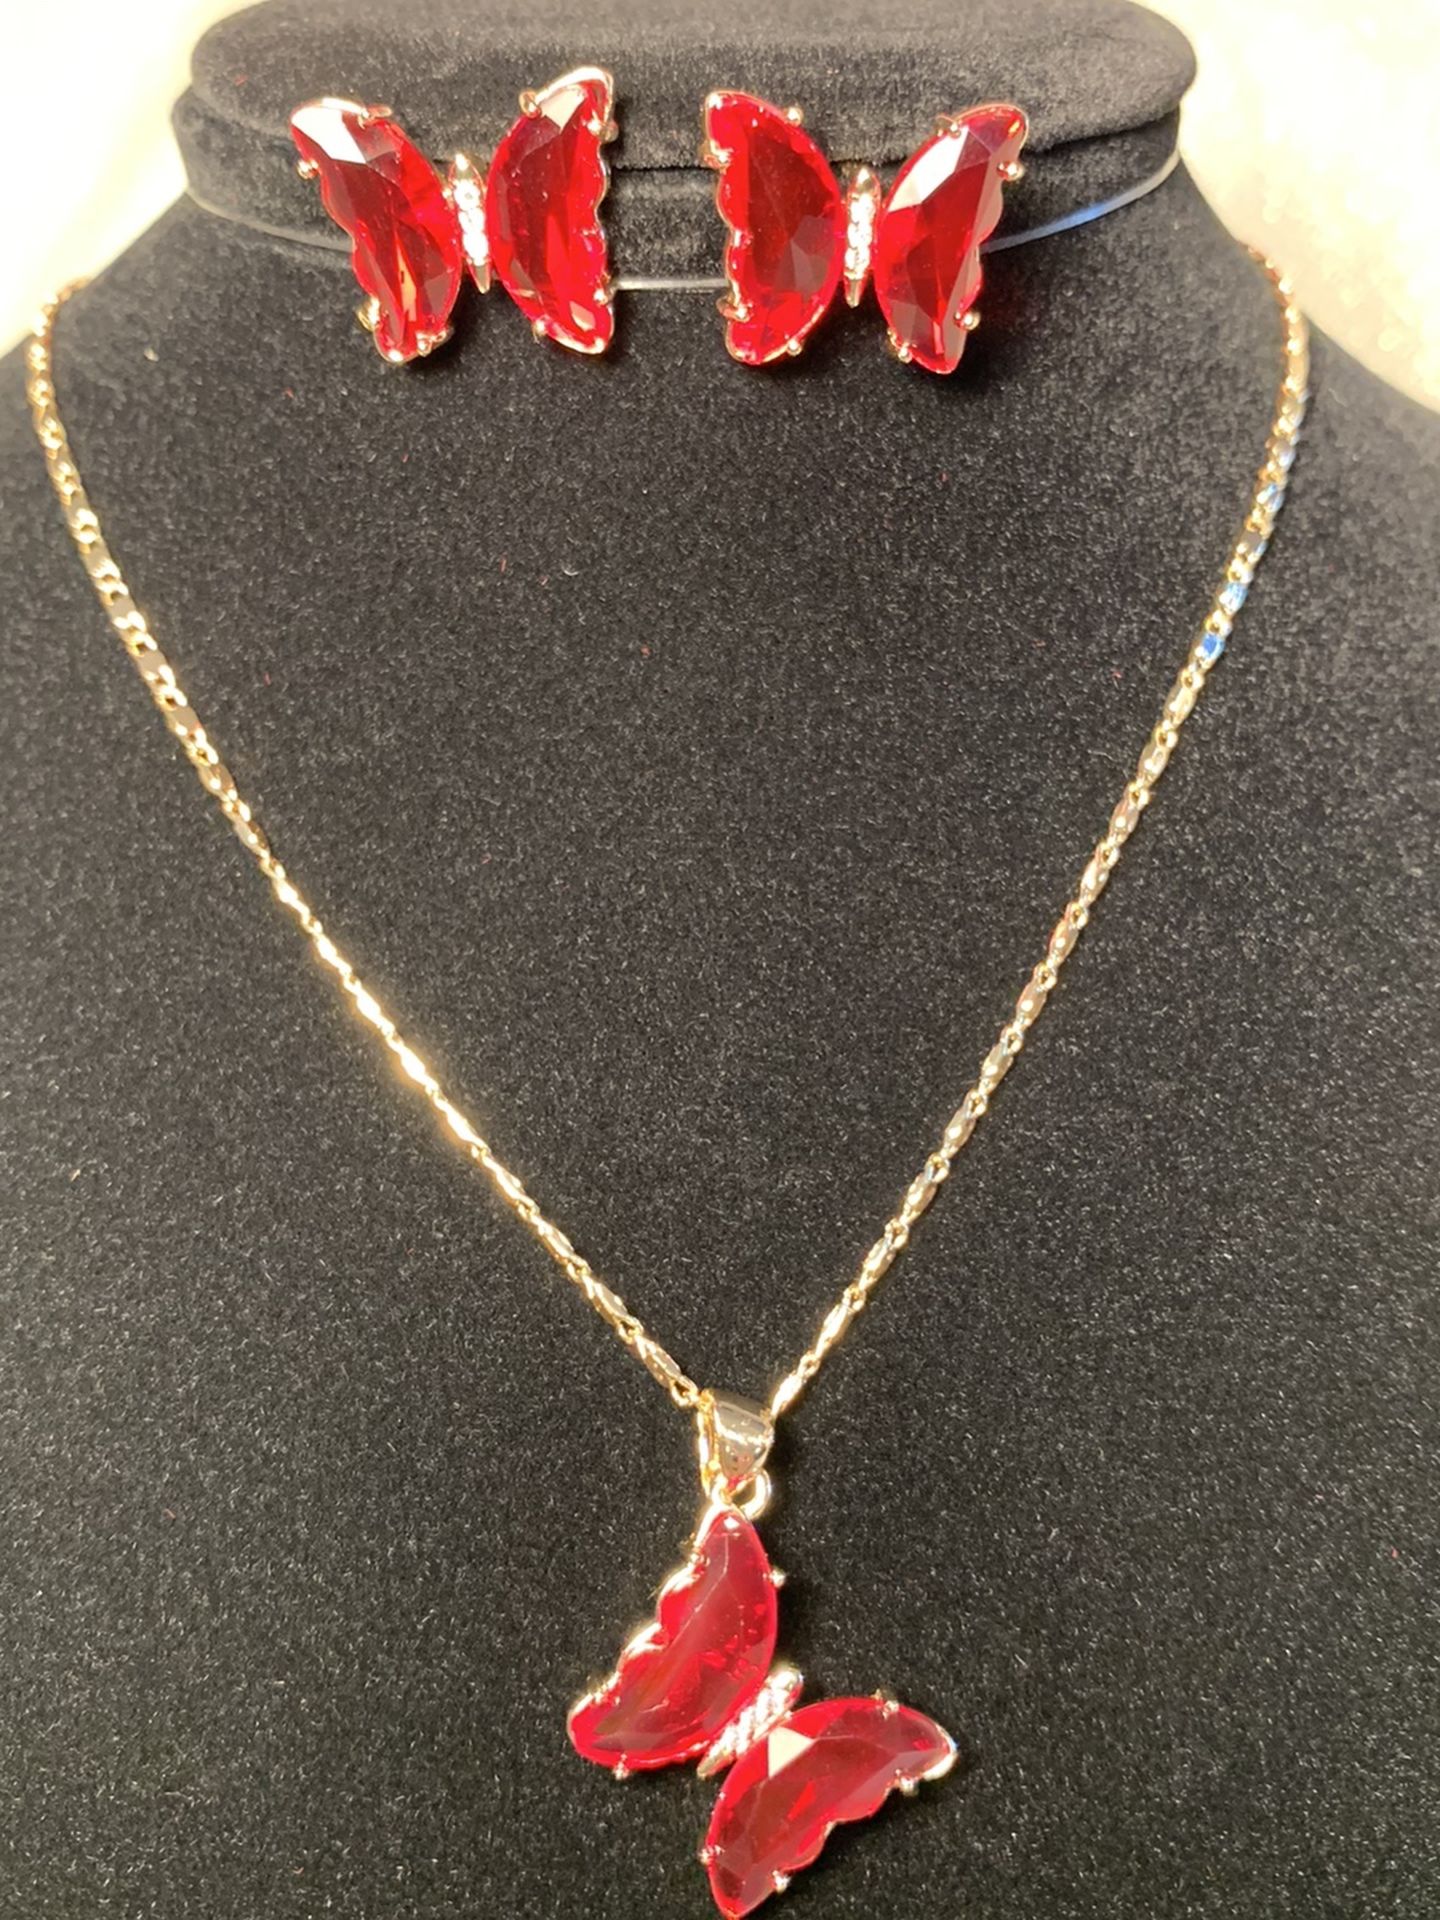 Gold Filled/ Oro Laminado Red Butterfly Pendant, Necklace and Earrings Set